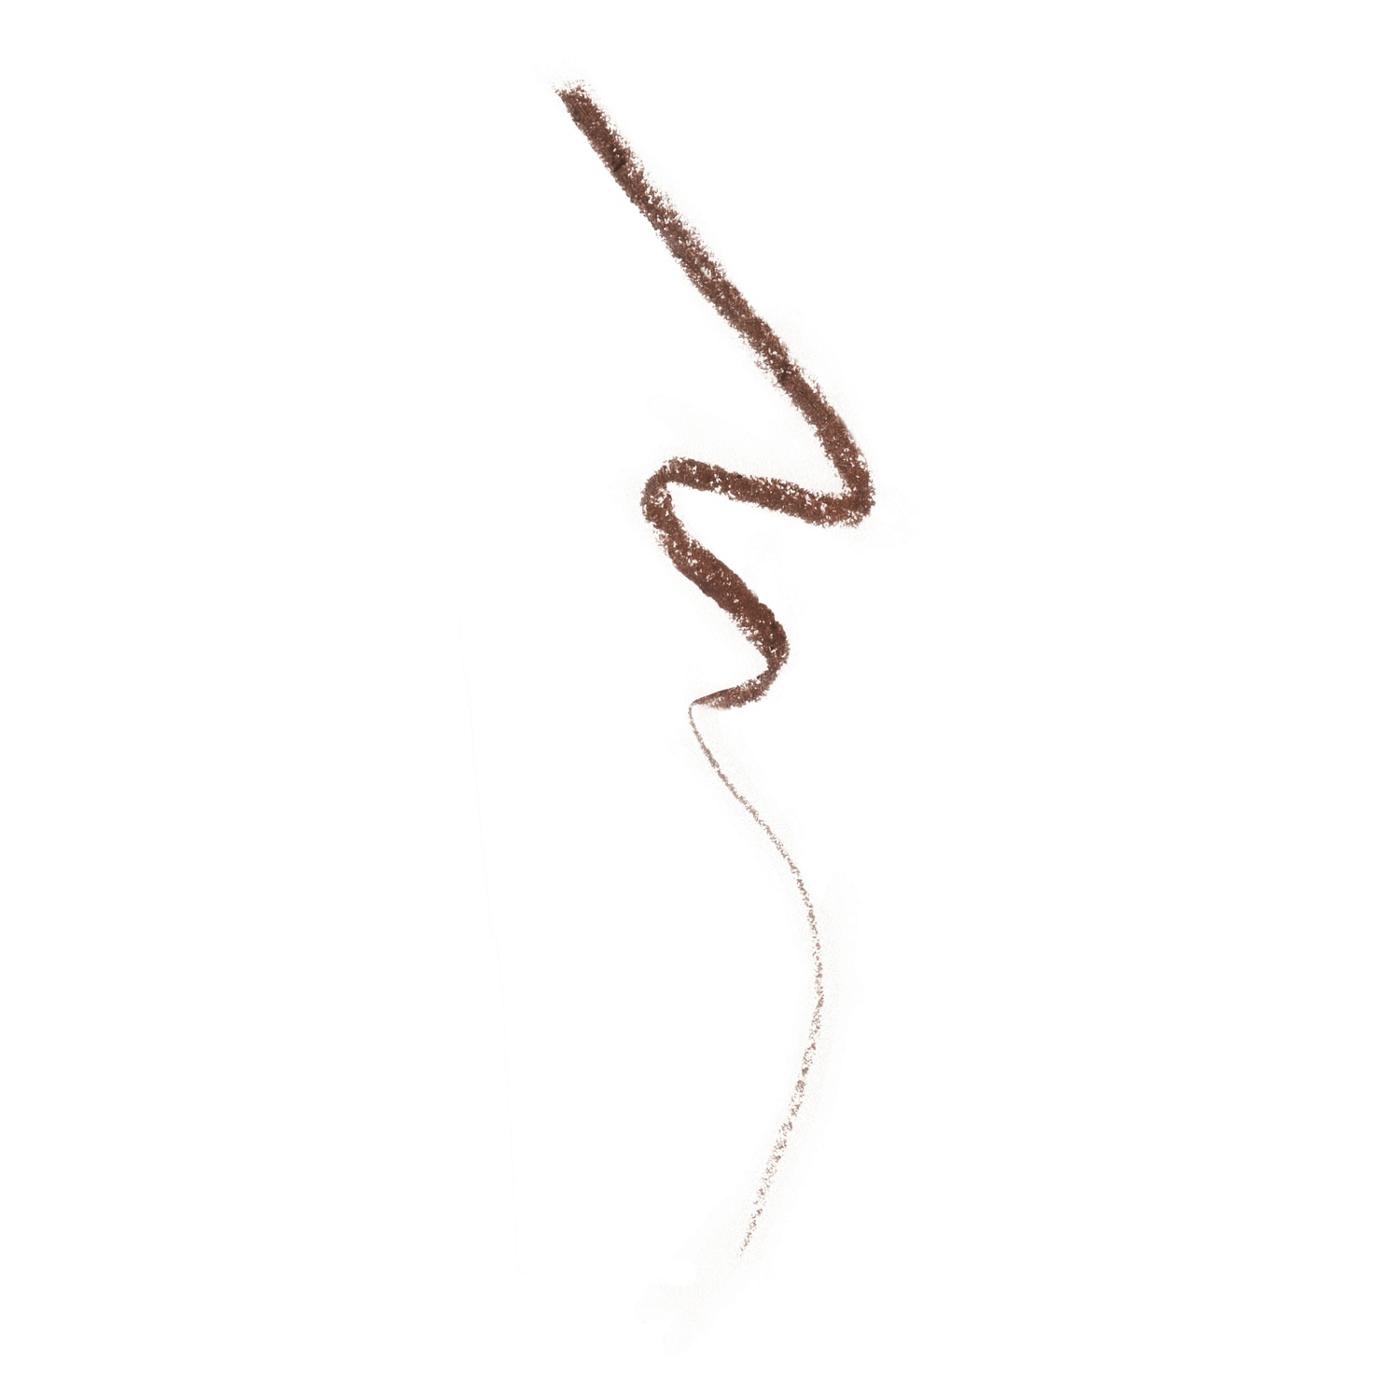 Makeup Revolution Fluffy Brow Duo Pencil - Ash Brown; image 4 of 4